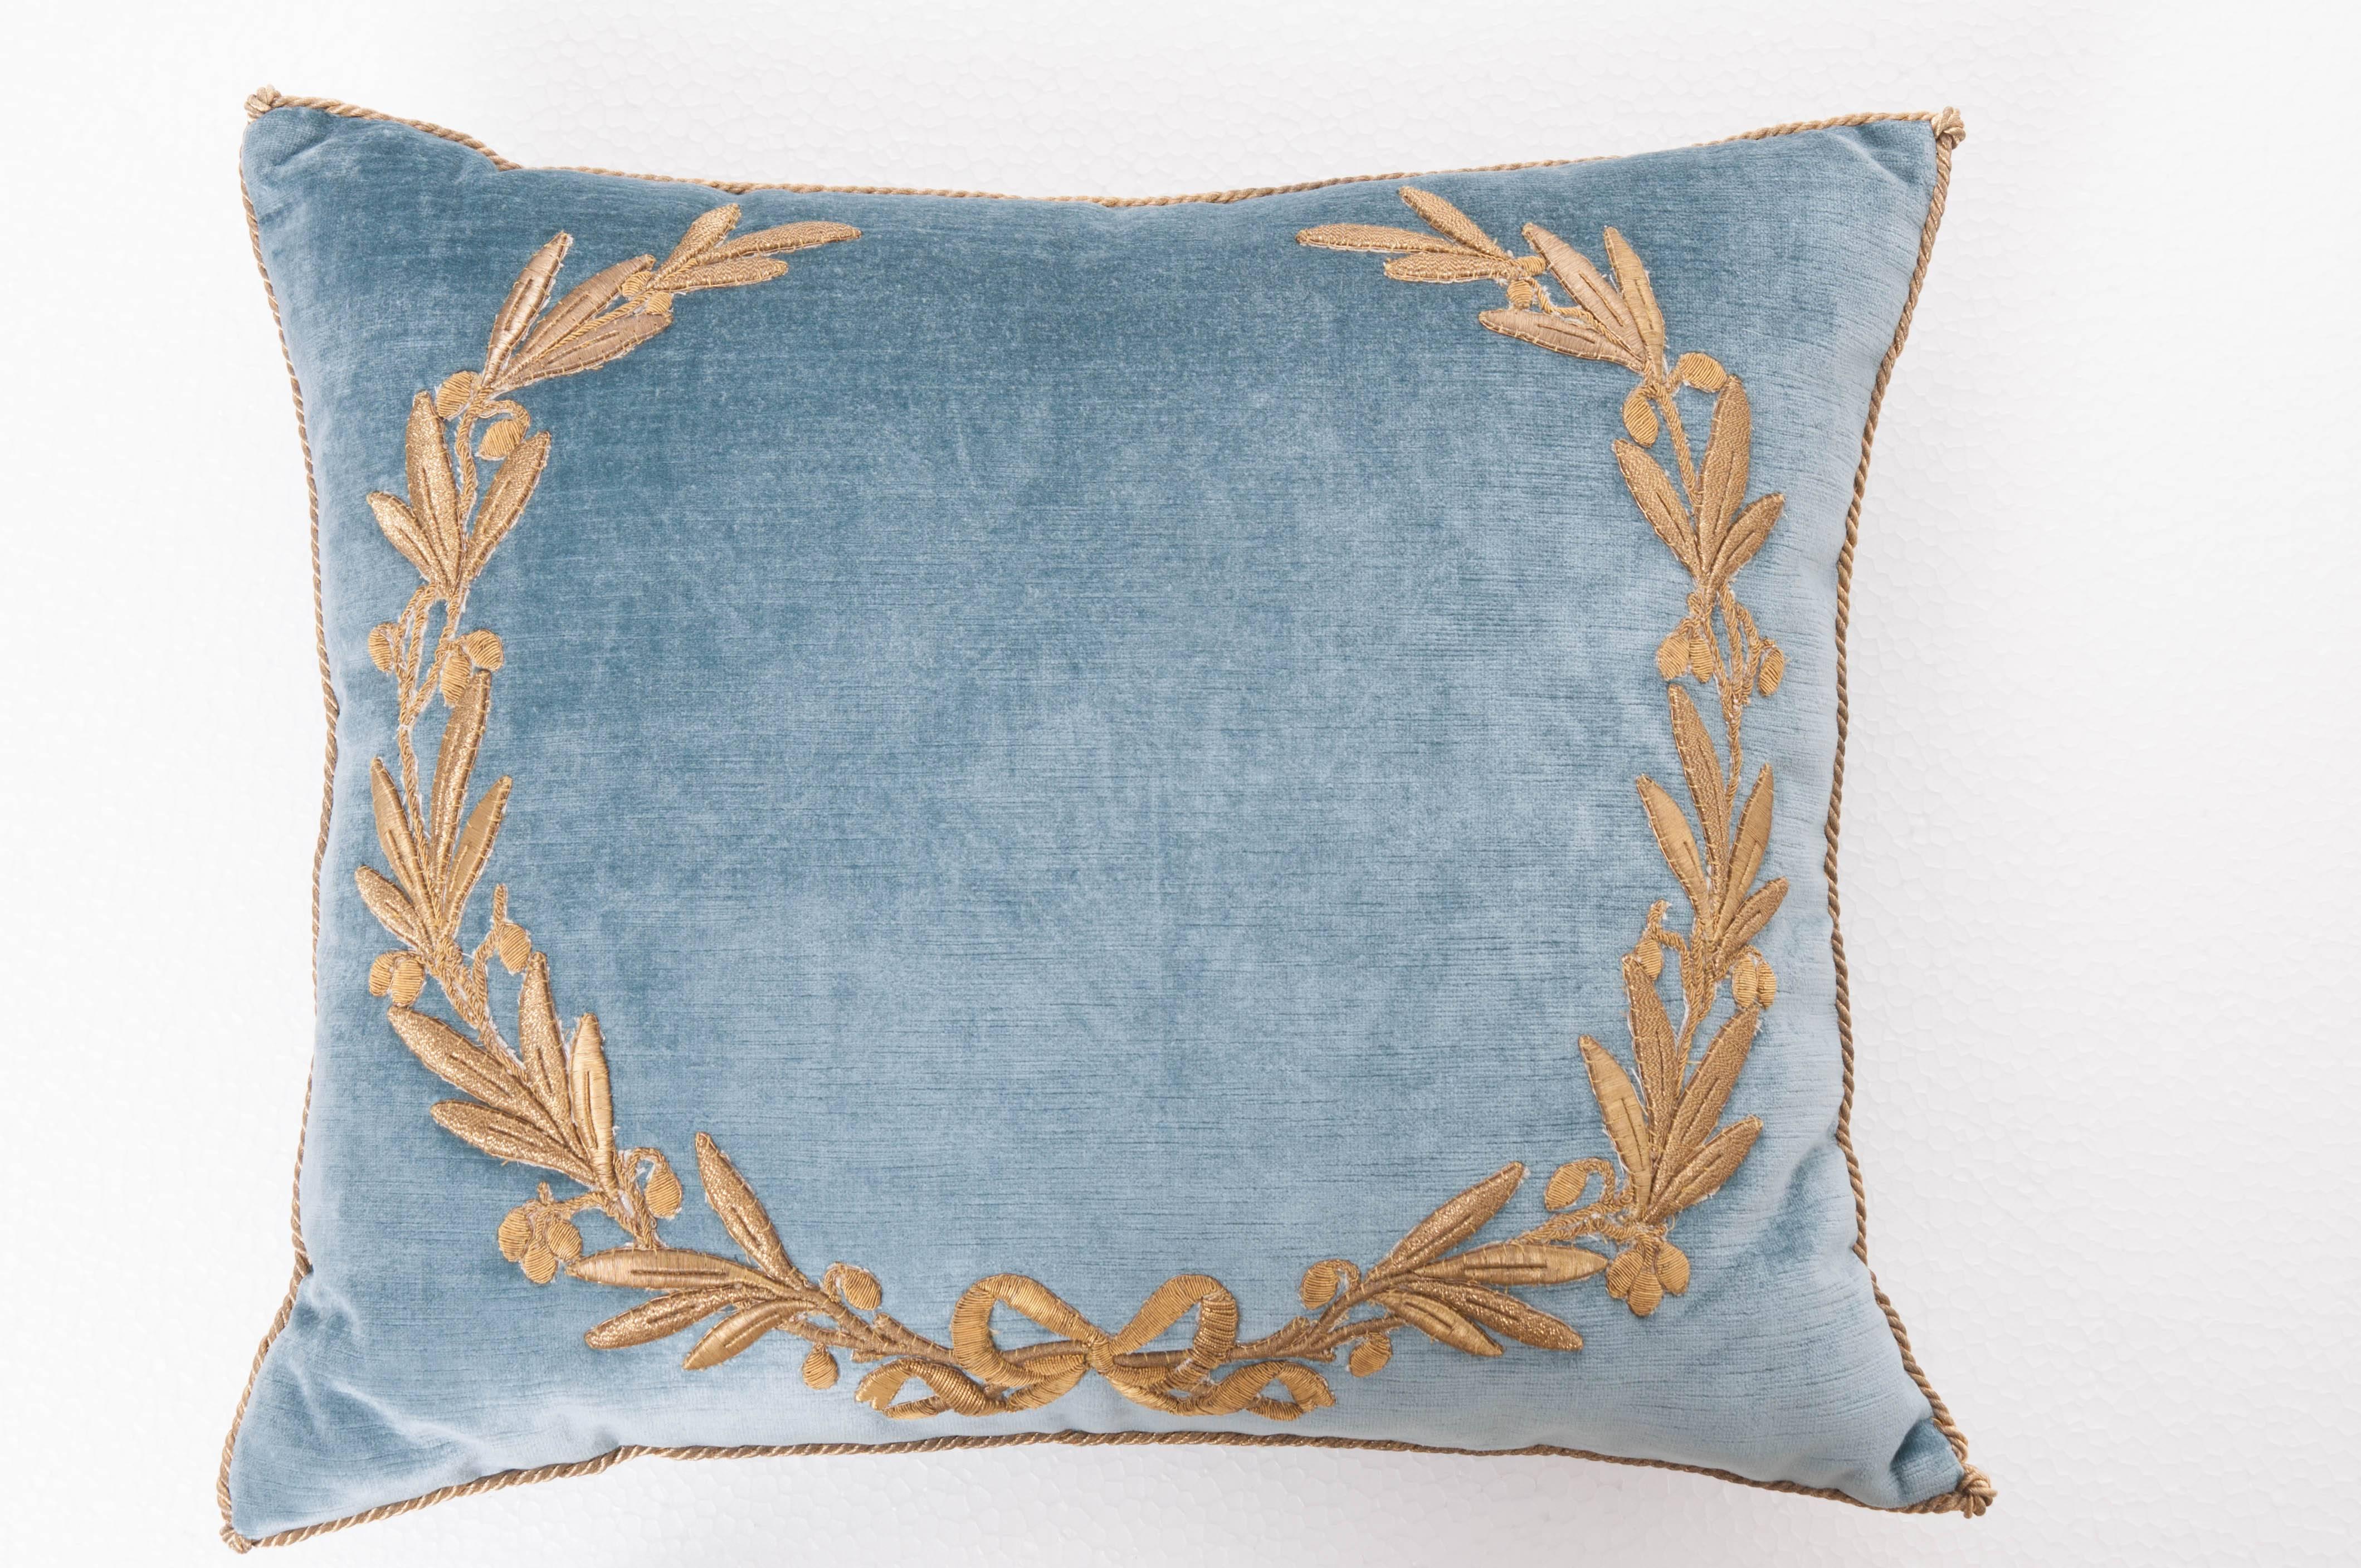 Antique European raised gold metallic embroidery of a neoclassical wreath with a bow on Wedgewood blue velvet. Hand trimmed with vintage gold cording knotted in the corners. Down filled.